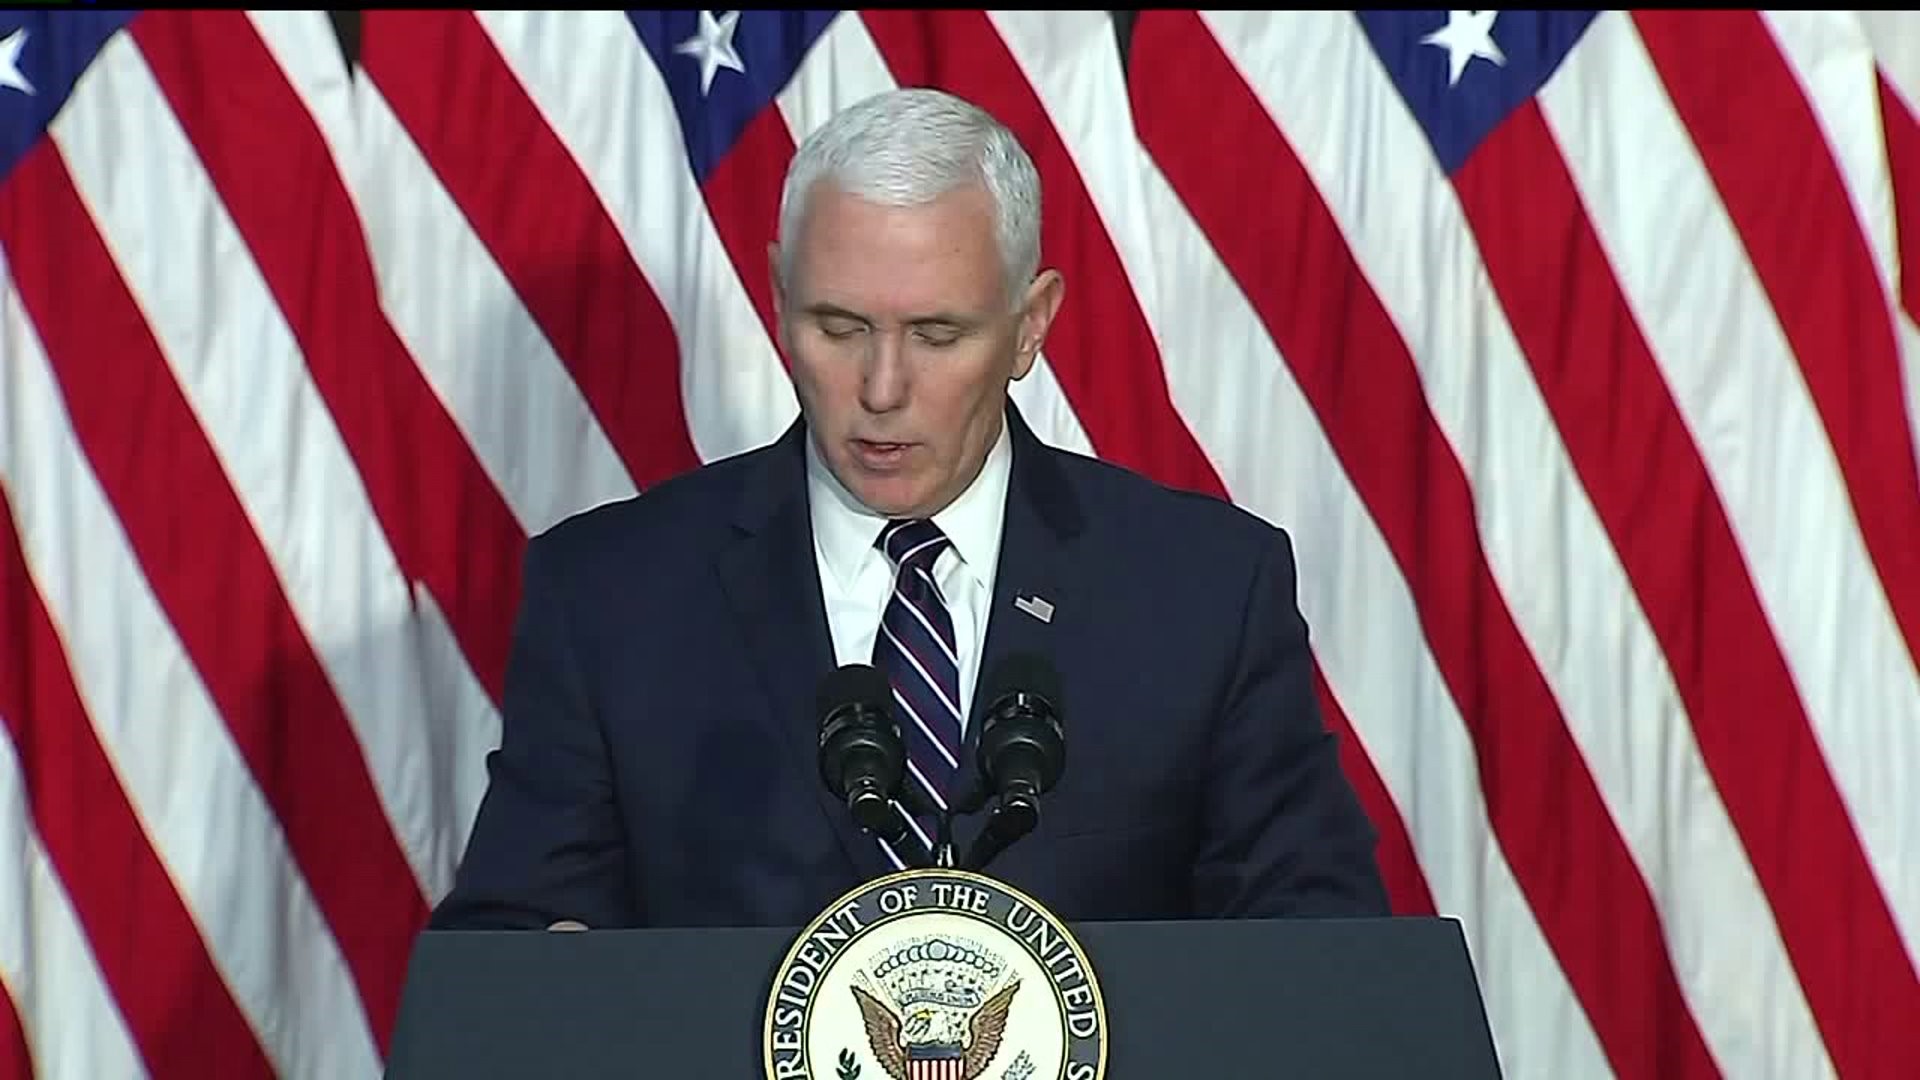 Vice President Mike Pence to visit York on Thursday